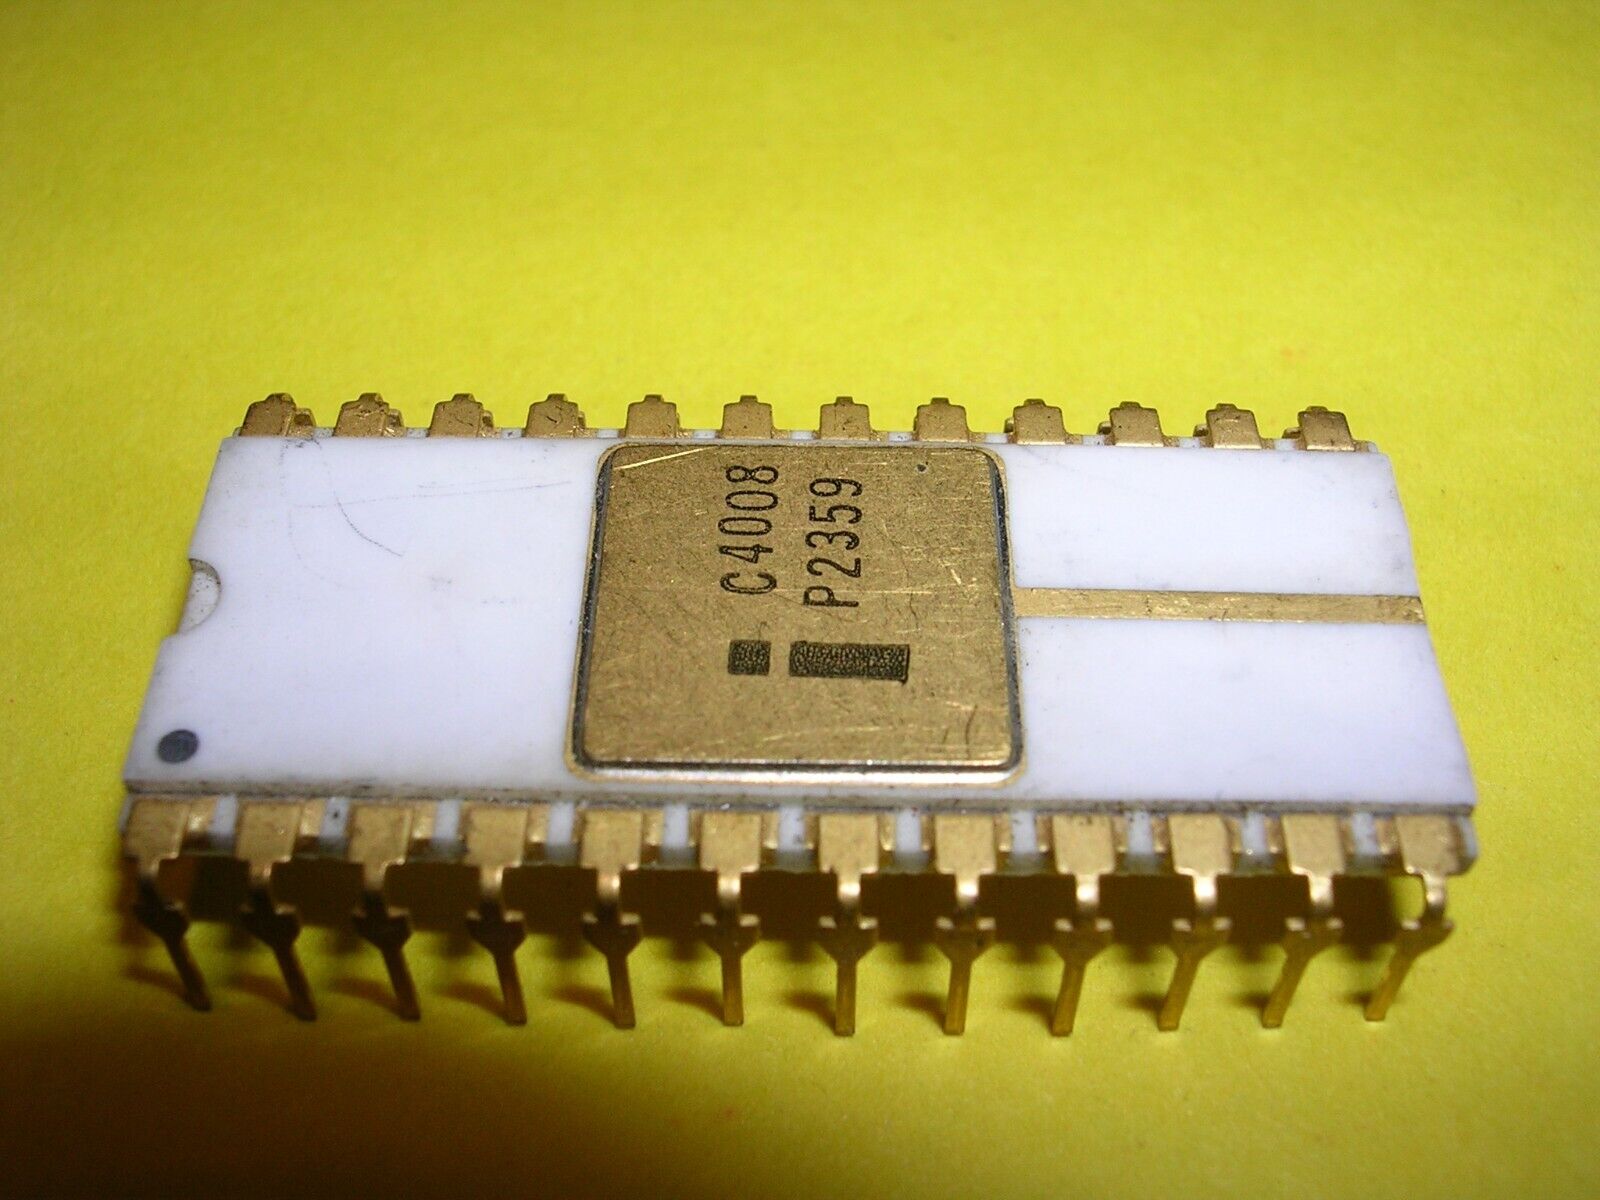 Intel C4008 - Standard Memory and I/O Interface for 4004 (C4004)